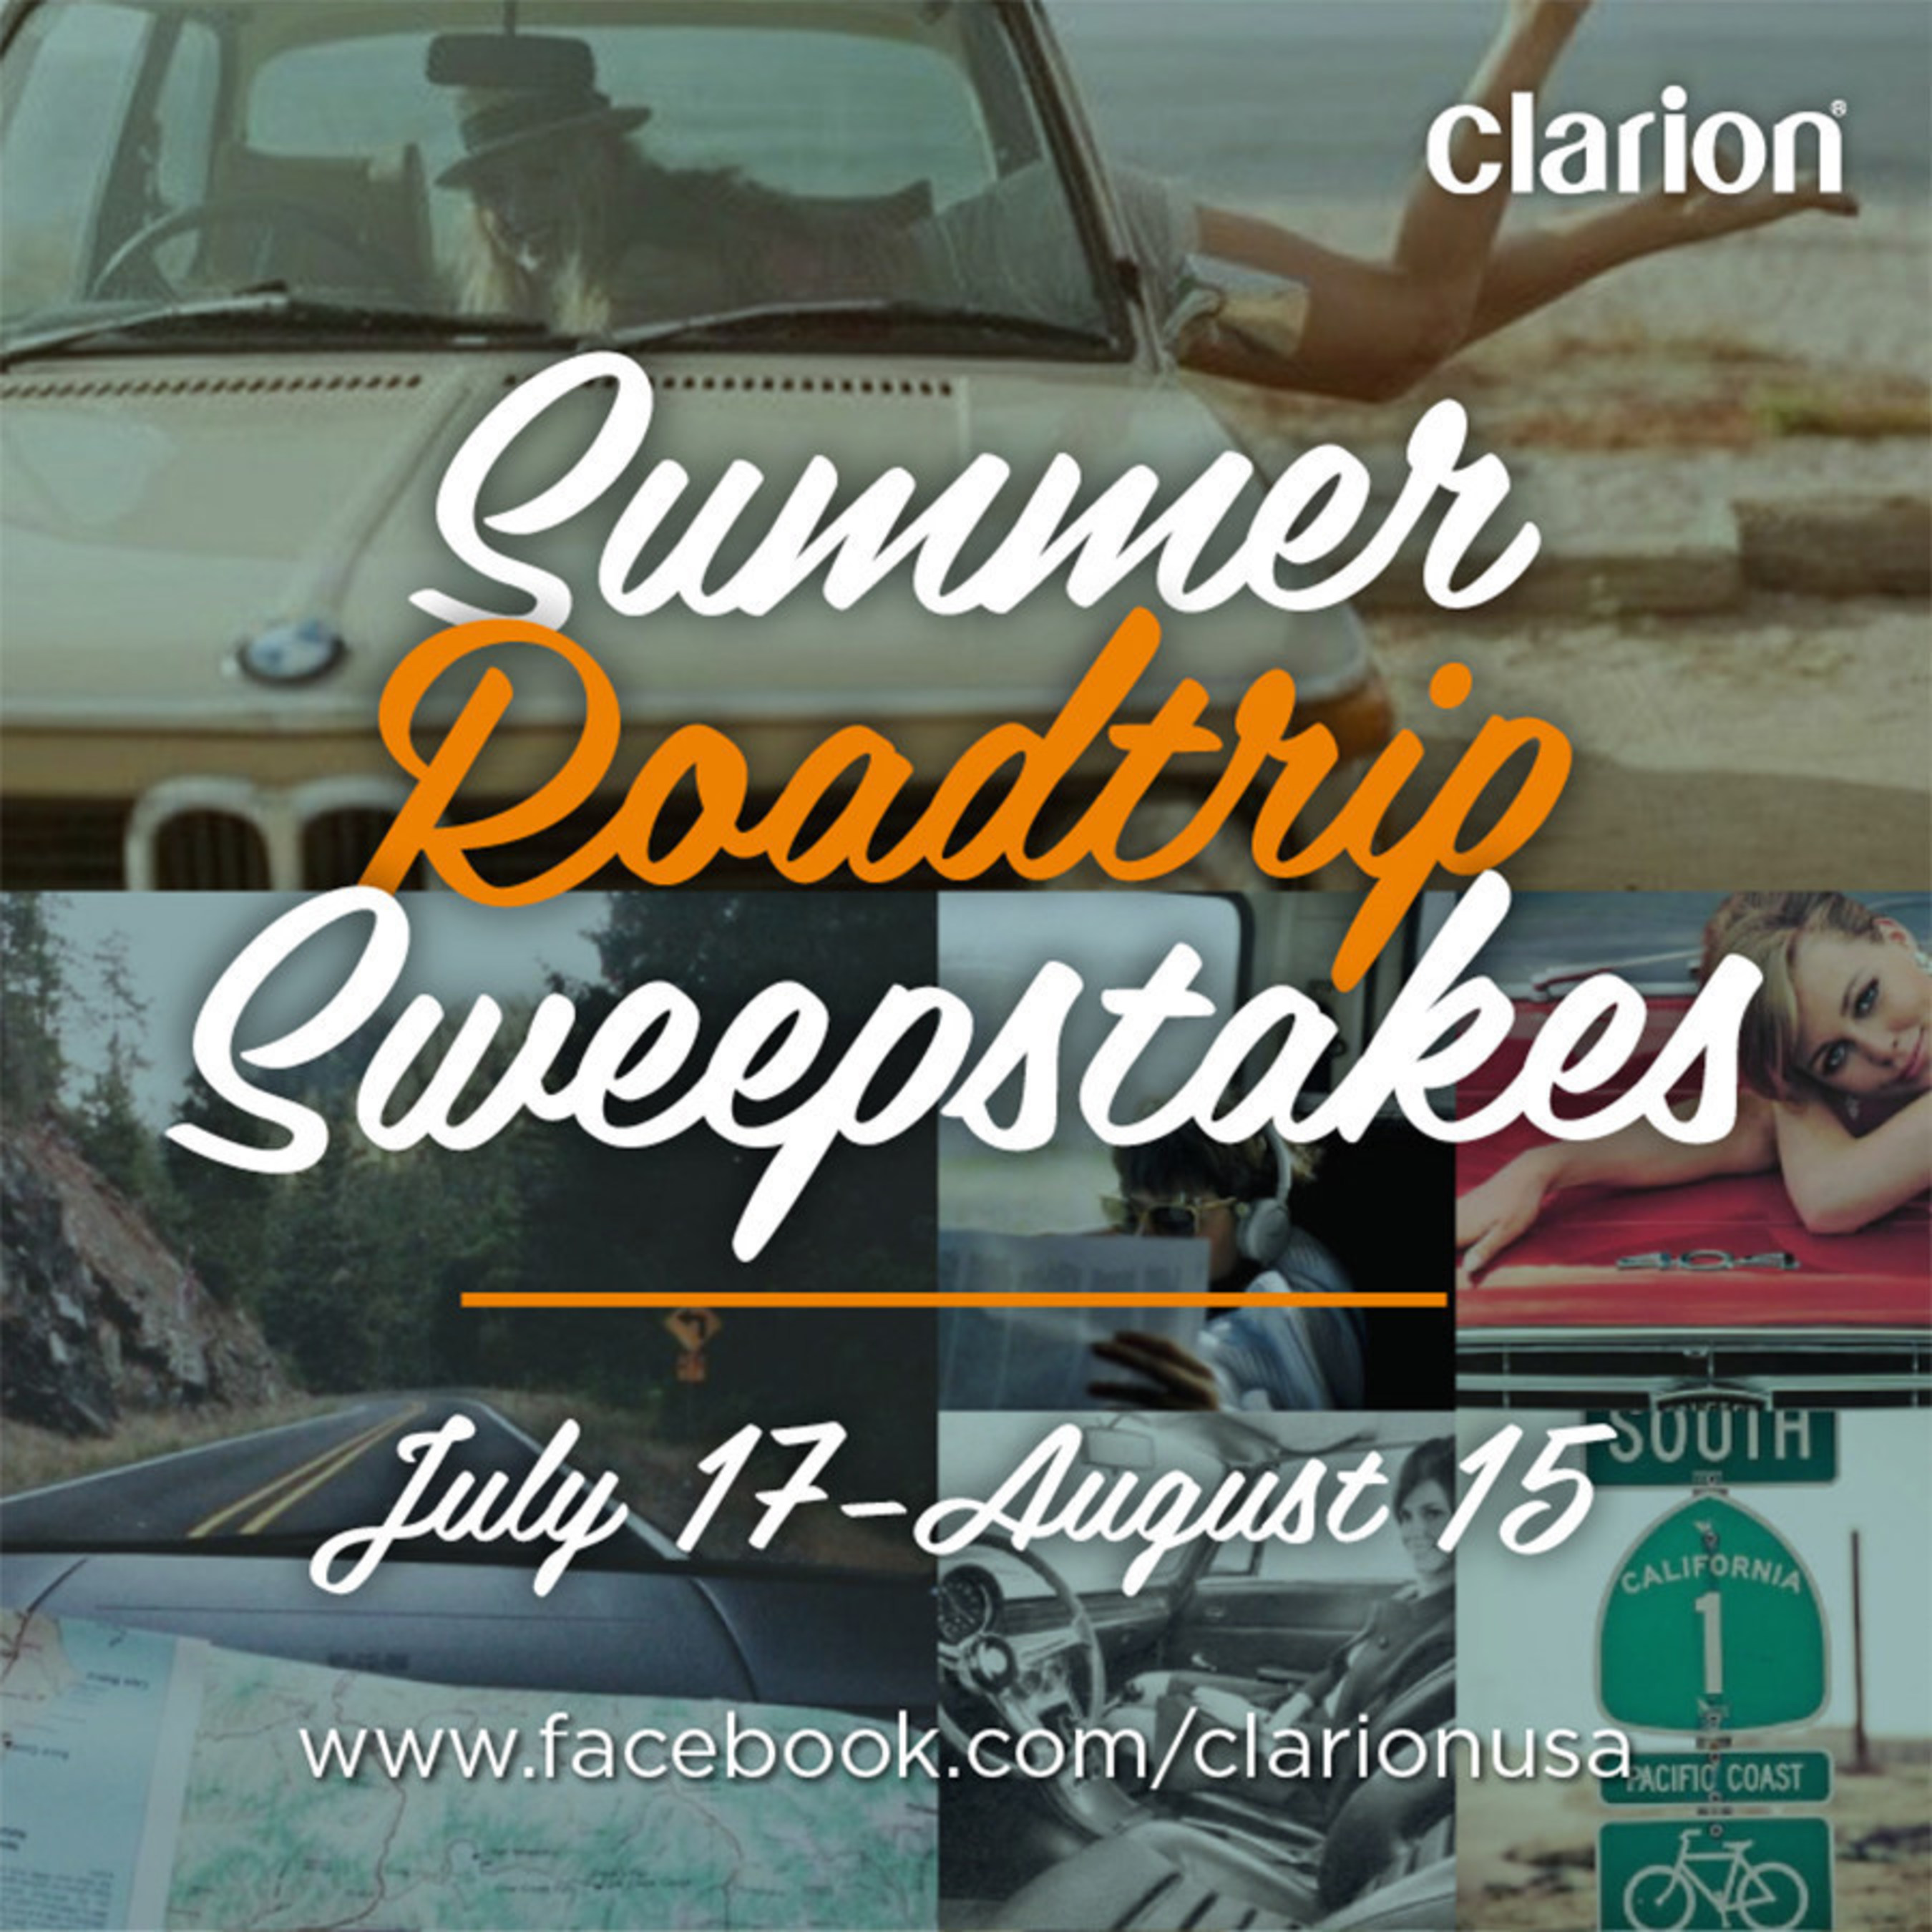 Clarion's Summer Roadtrip Sweepstakes promotion inspired by the global influence of the BMW 2002 in fashion and lifestyle and relates to the first Clarion Builds project of a complete restoration of a 1974 BMW 2002. Clarion's Summer Roadtrip Sweepstakes runs from July 17 until August 15, 2014. To enter the sweepstakes for a chance to win cool prizes, go to www.facebook.com/clarionusa and follow directions. No purchase is necessary. Clarion's Summer Roadtrip Sweepstakes' offers a gift card prizes each week and a fashionable grand prize package that will help you navigate your summer road trip in style! (PRNewsFoto/Clarion Corporation of America)